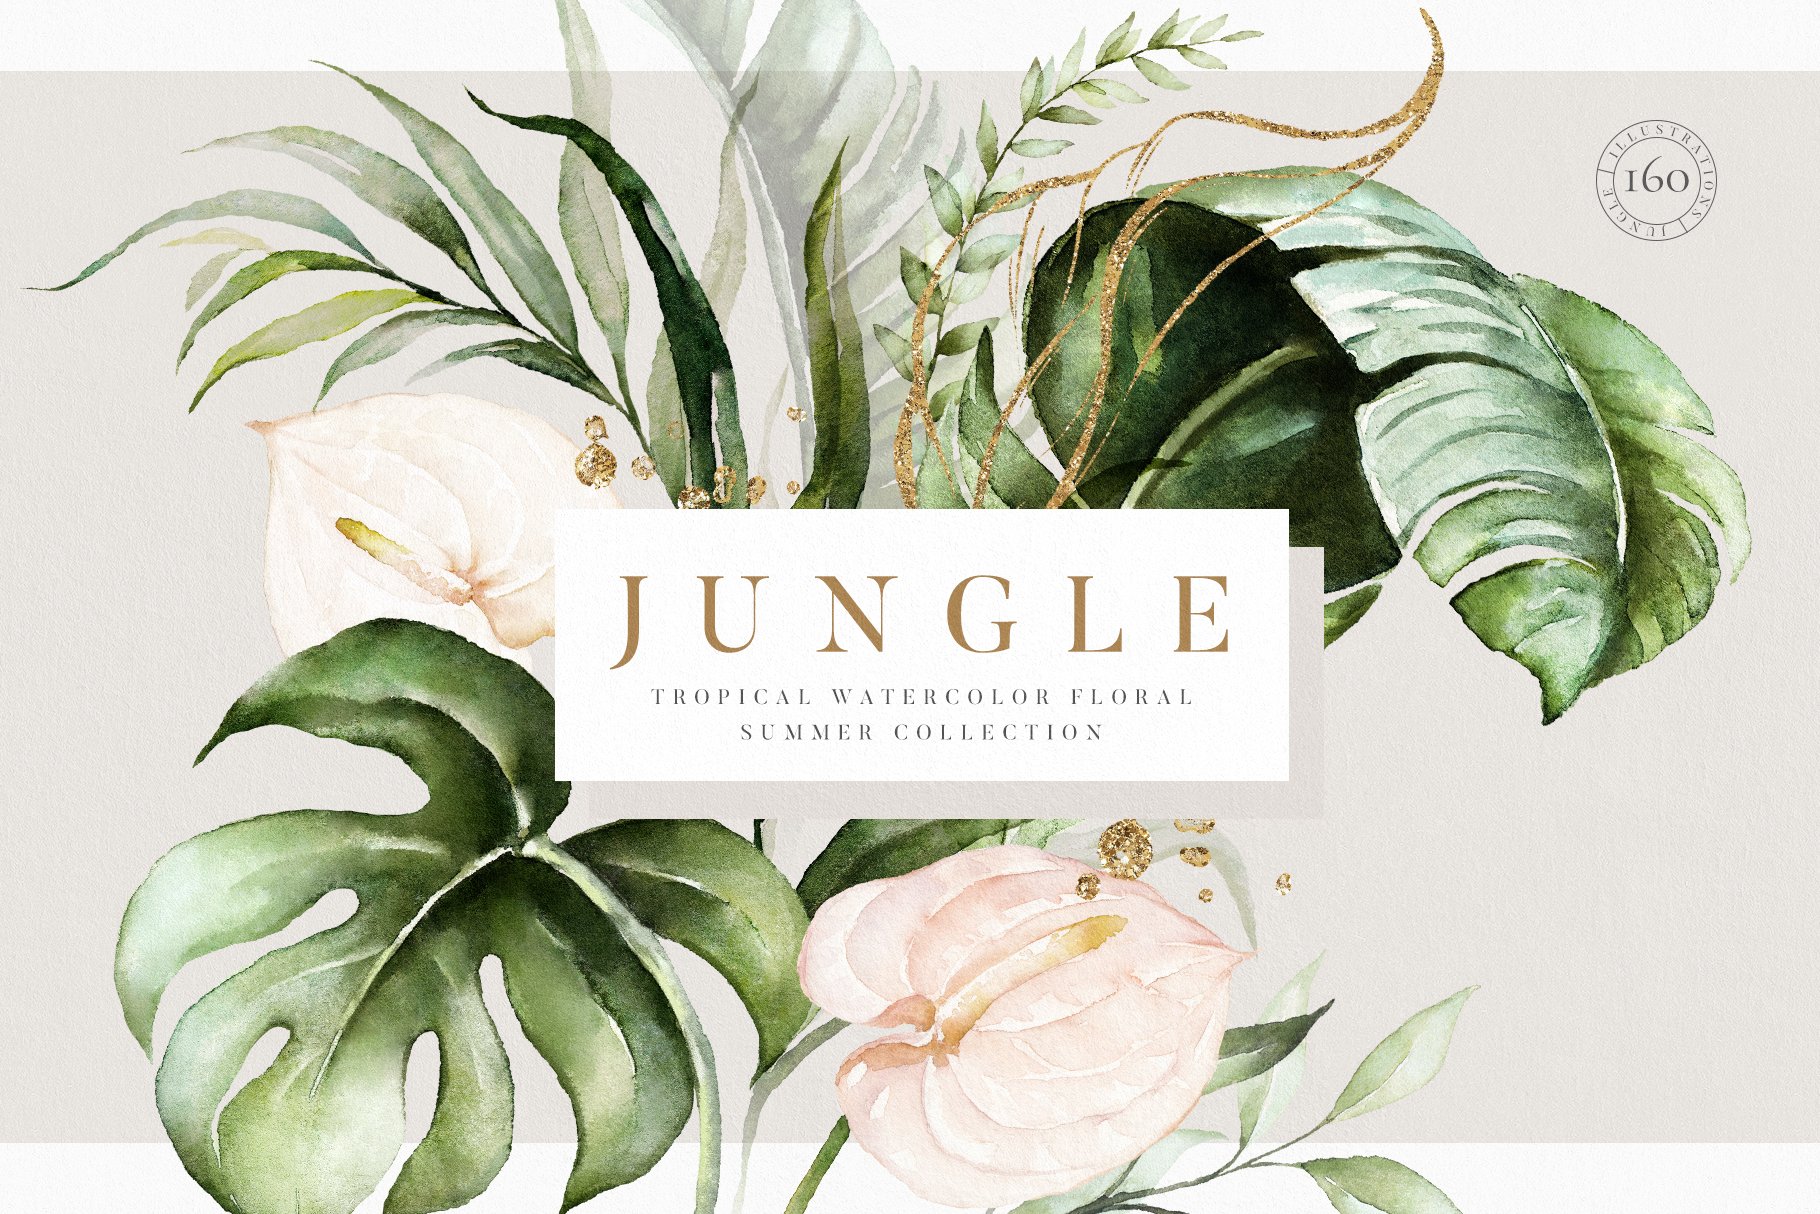 Jungle - Watercolor Tropical Floral cover image.